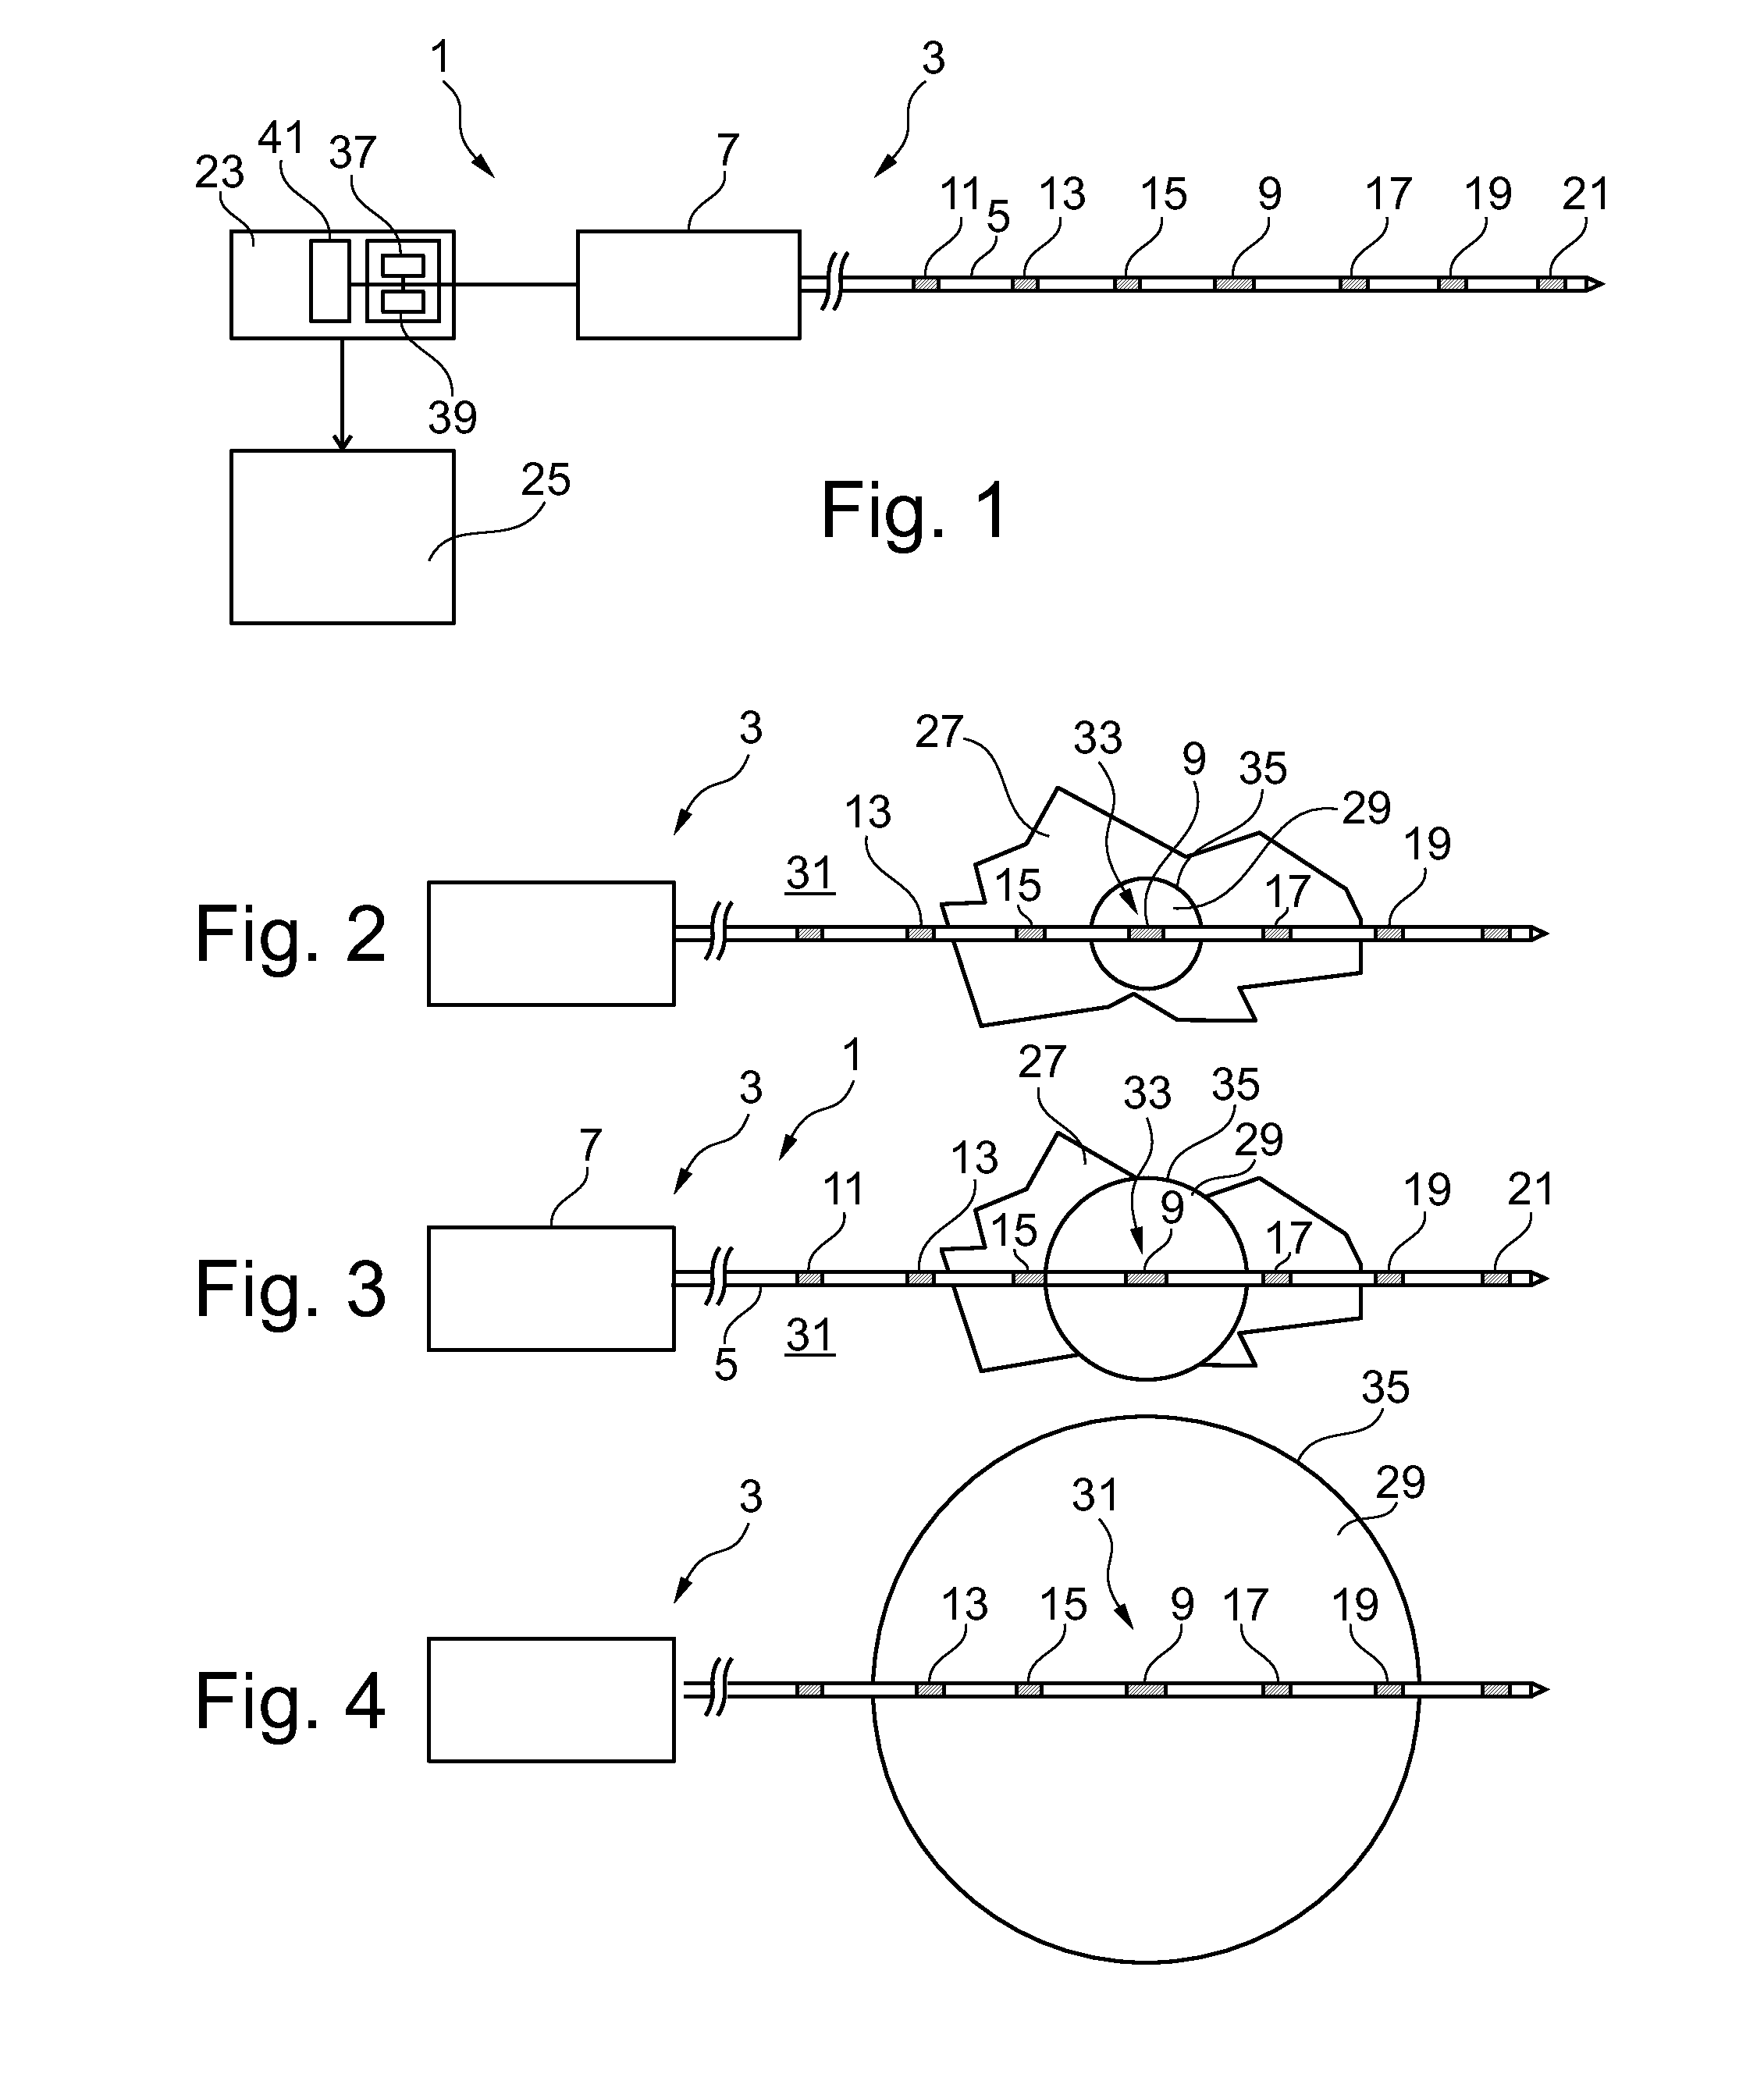 Interventional ablation device with tissue discriminating capability